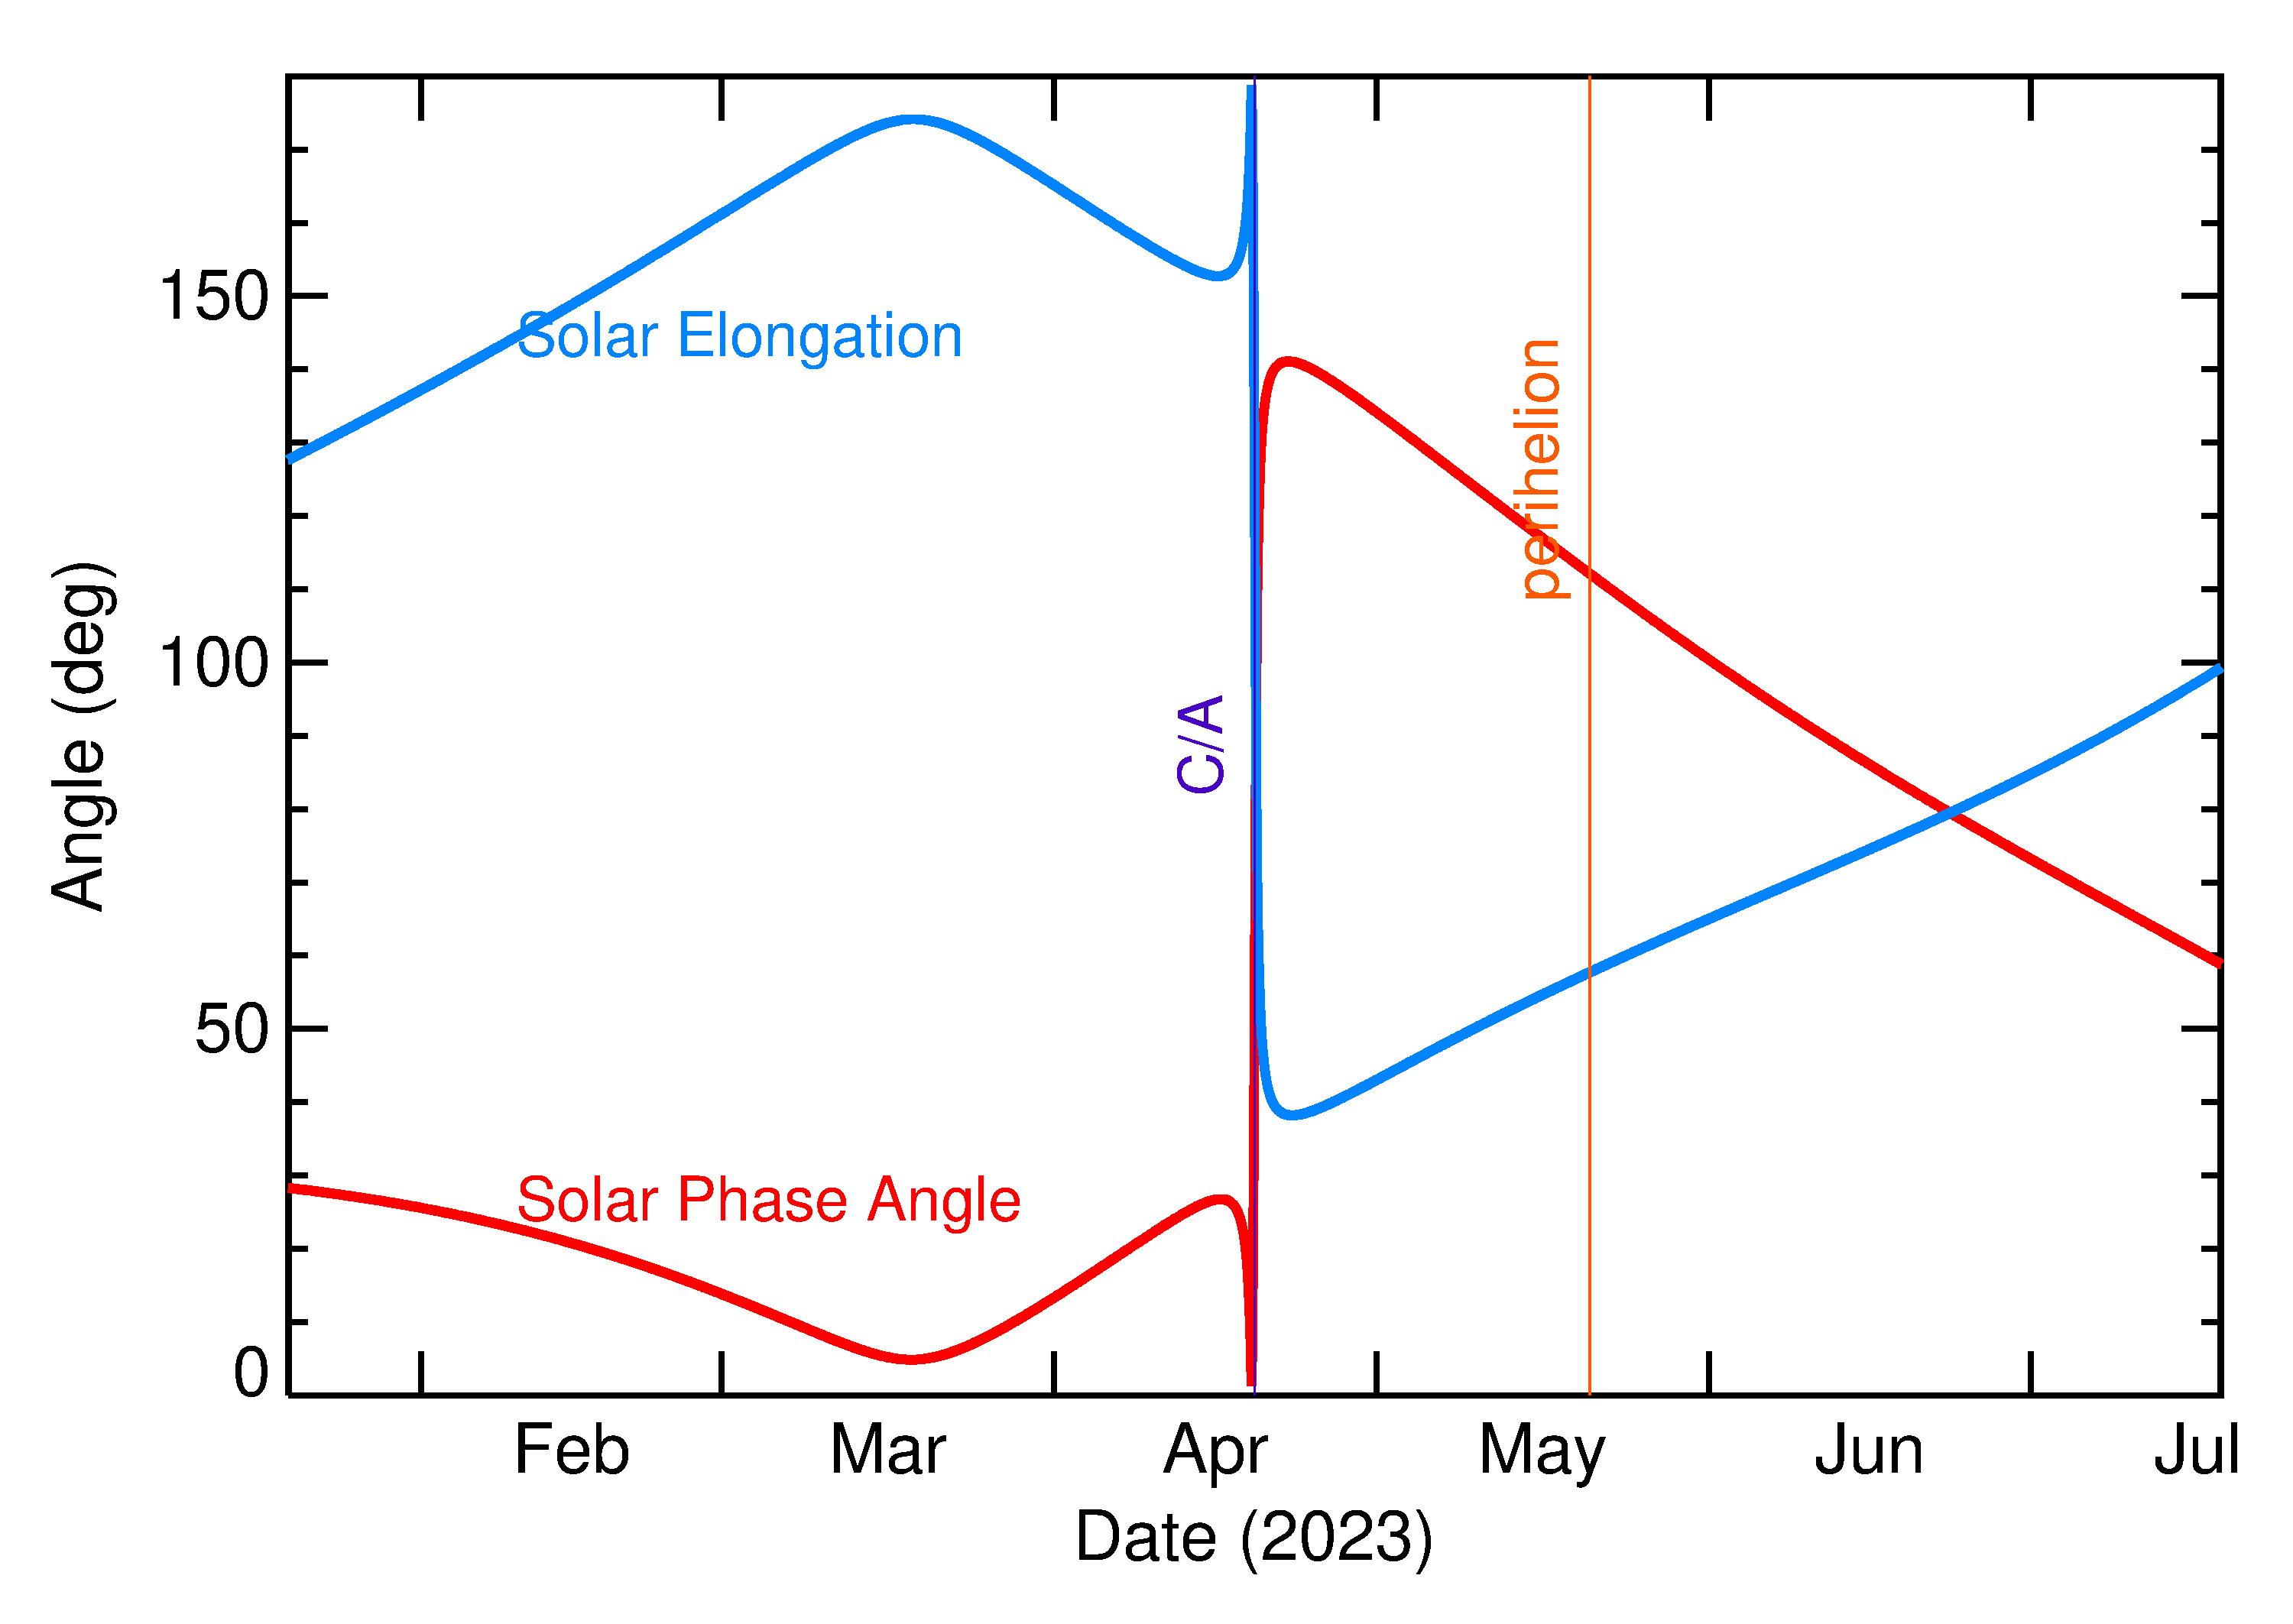 Solar Elongation and Solar Phase Angle of 2023 HT in the months around closest approach